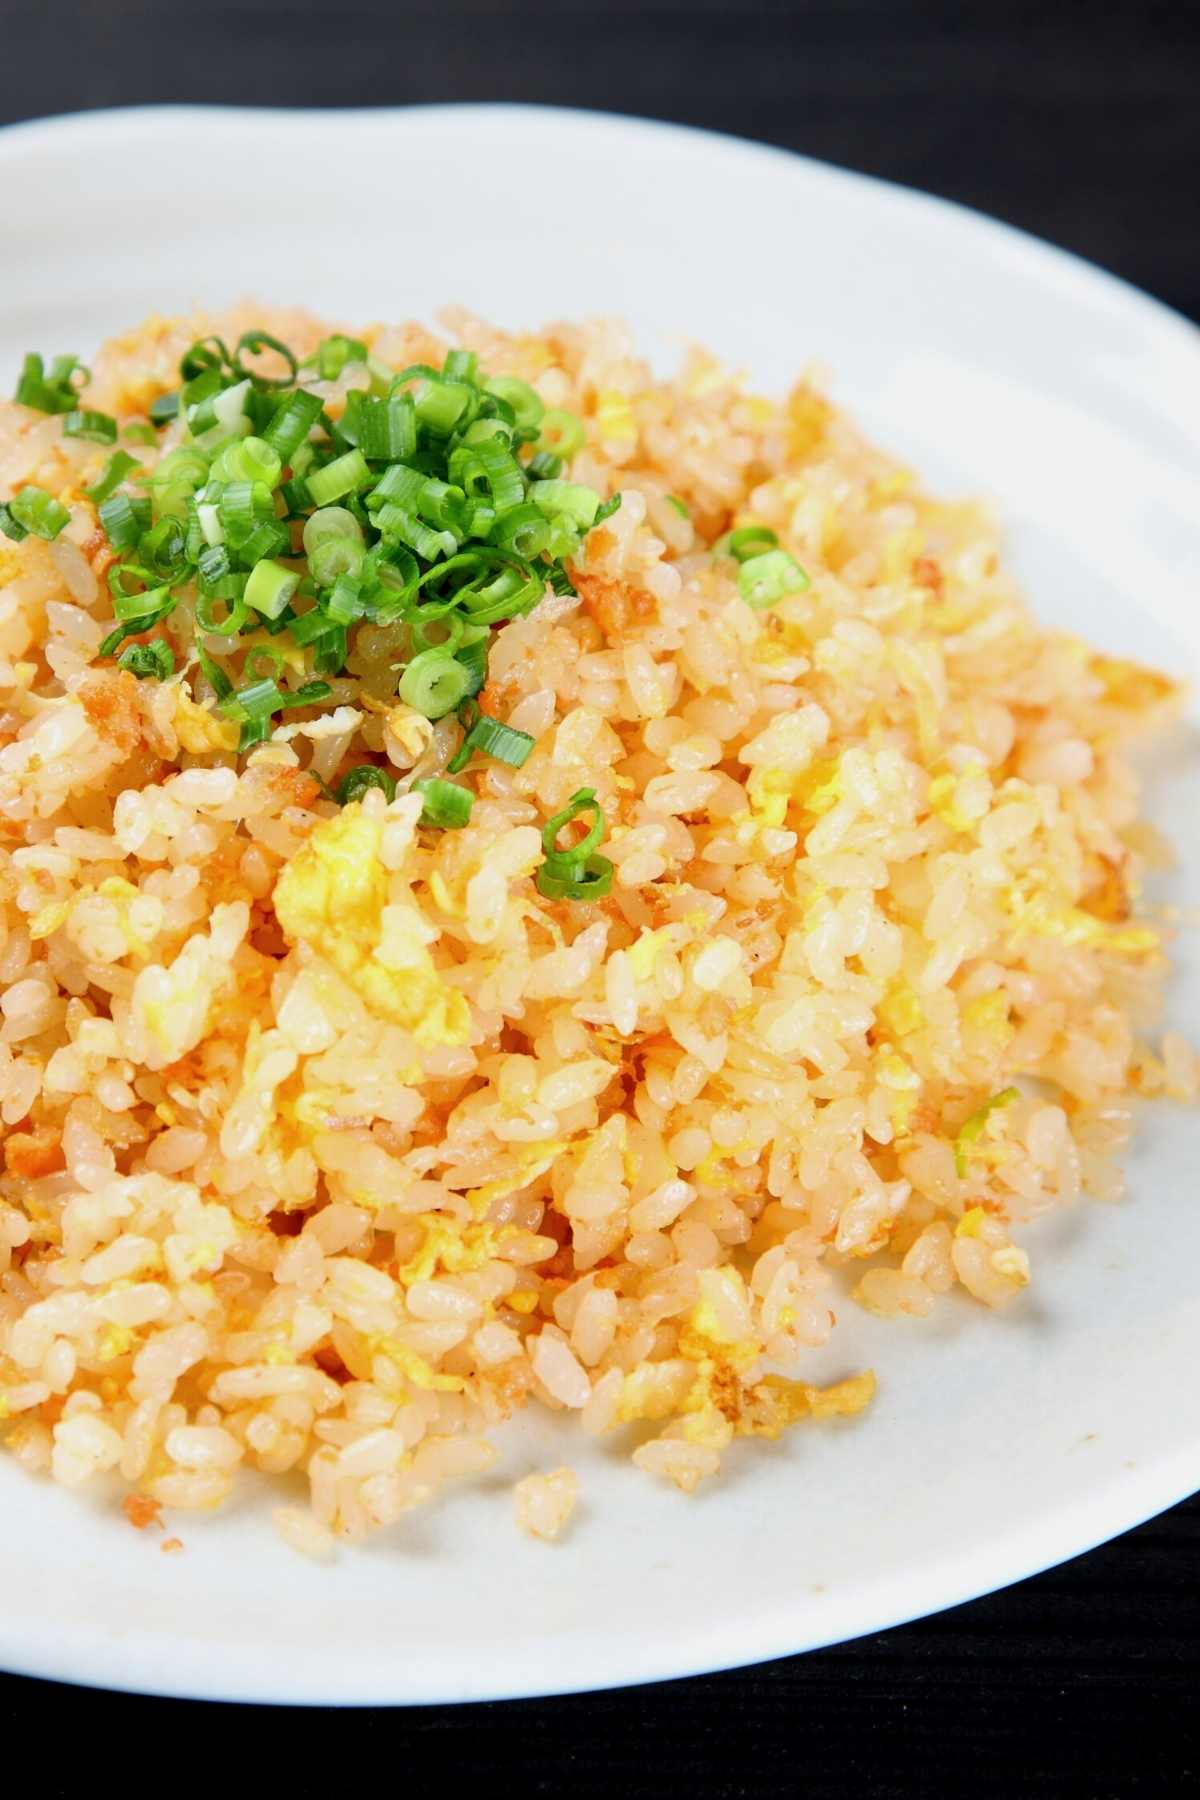 If you’ve ever eaten at a Japanese hibachi restaurant, you know the rice is incredibly tasty. This recipe for Hibachi Fried Rice is equally as good. It has everything you love including eggs, ginger, onions, rice, and seasonings.